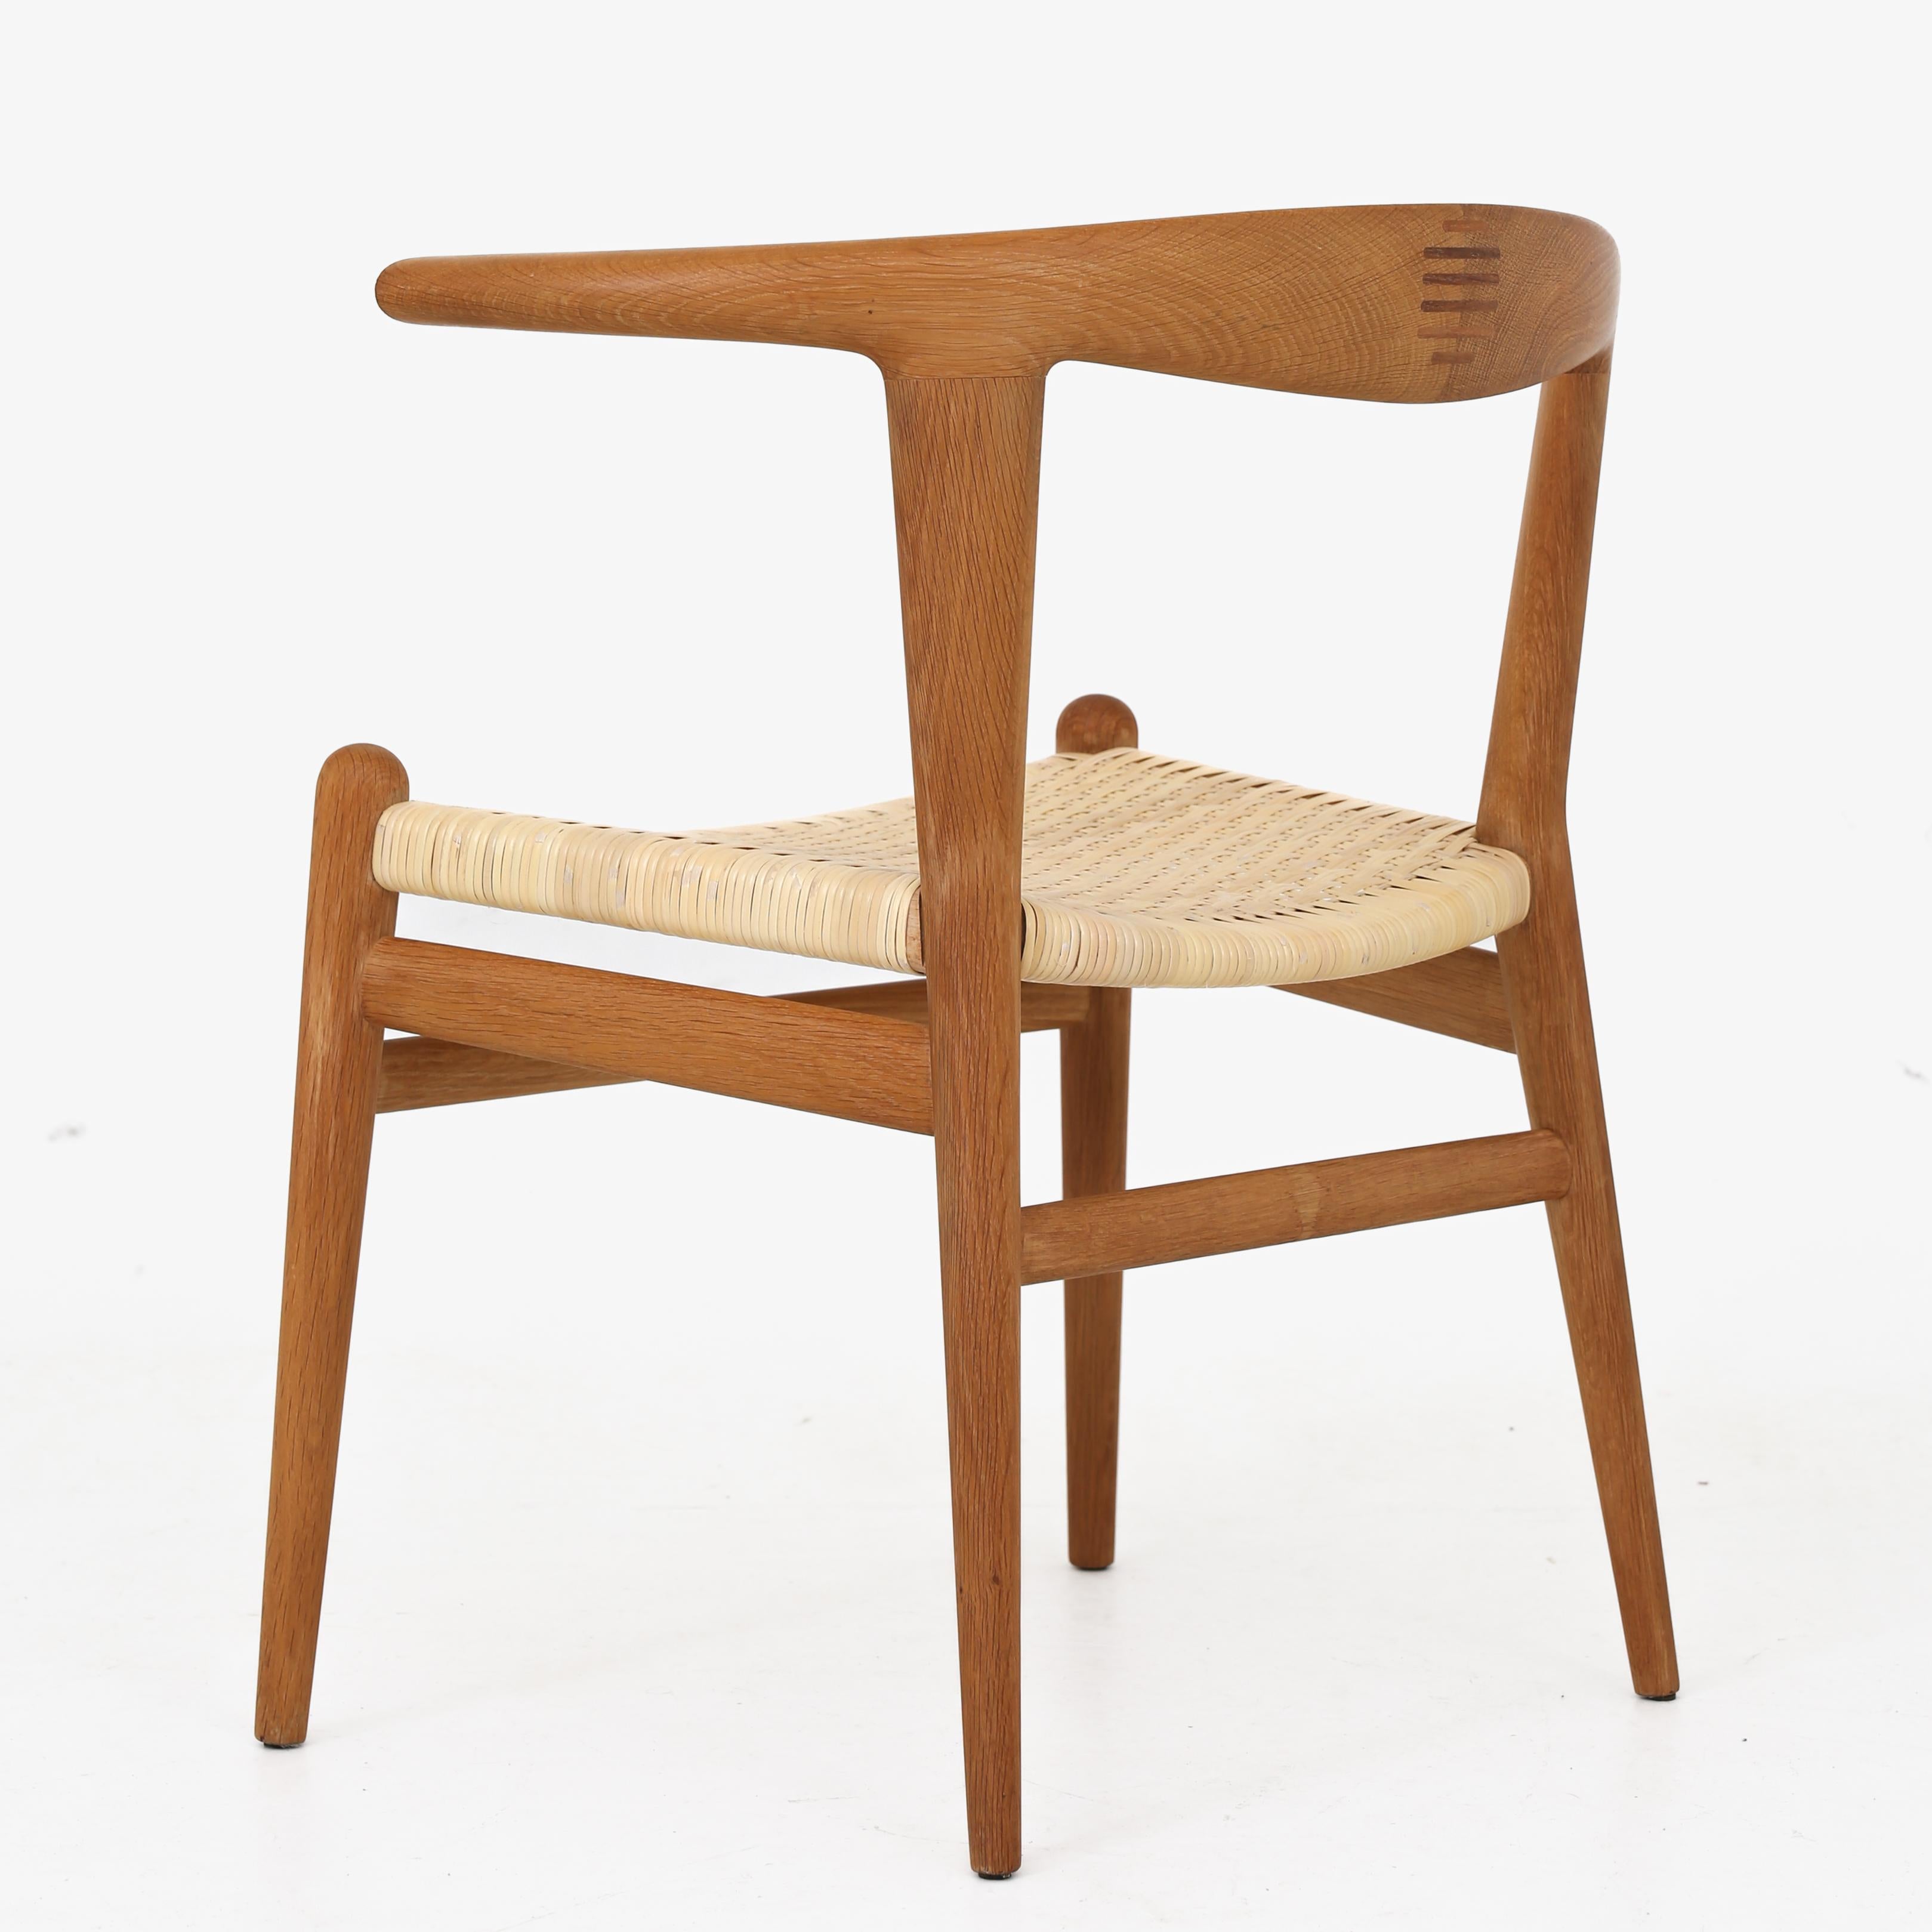 JH 518 - Rare 'Bull Chair' in solid oak and with seat of new, braided cane. Original label from manufacturer. Designed in 1961. Hans J. Wegner / Johannes Hansen